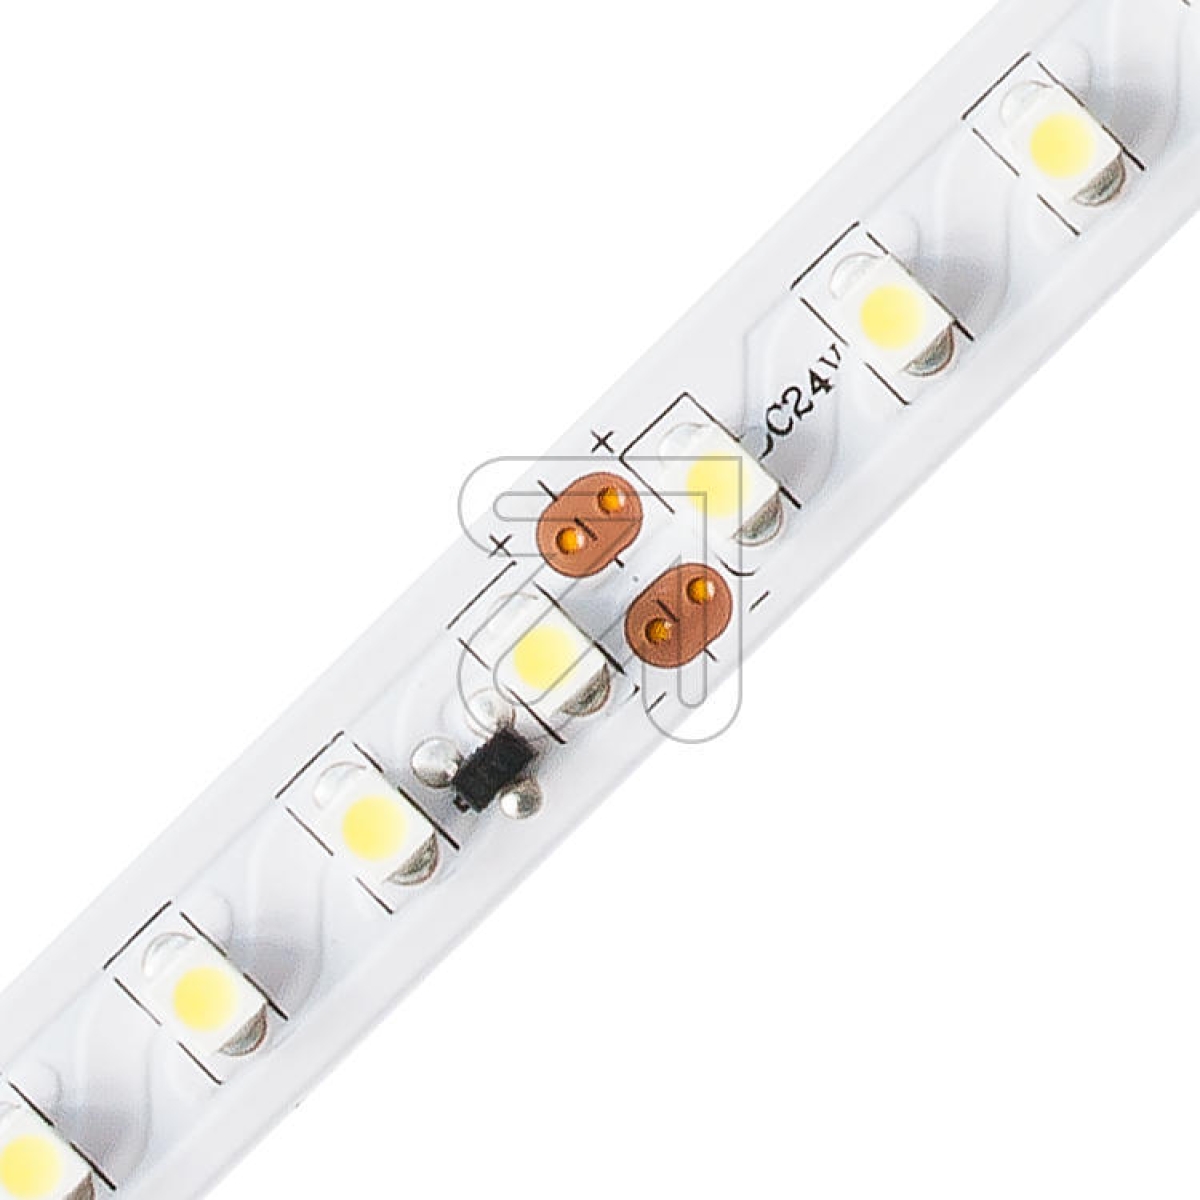 EVNIC Super LED strips roll 5m warm white 74W IP54 ICSB5424603502 10mm 24V/DCArticle-No: 686800